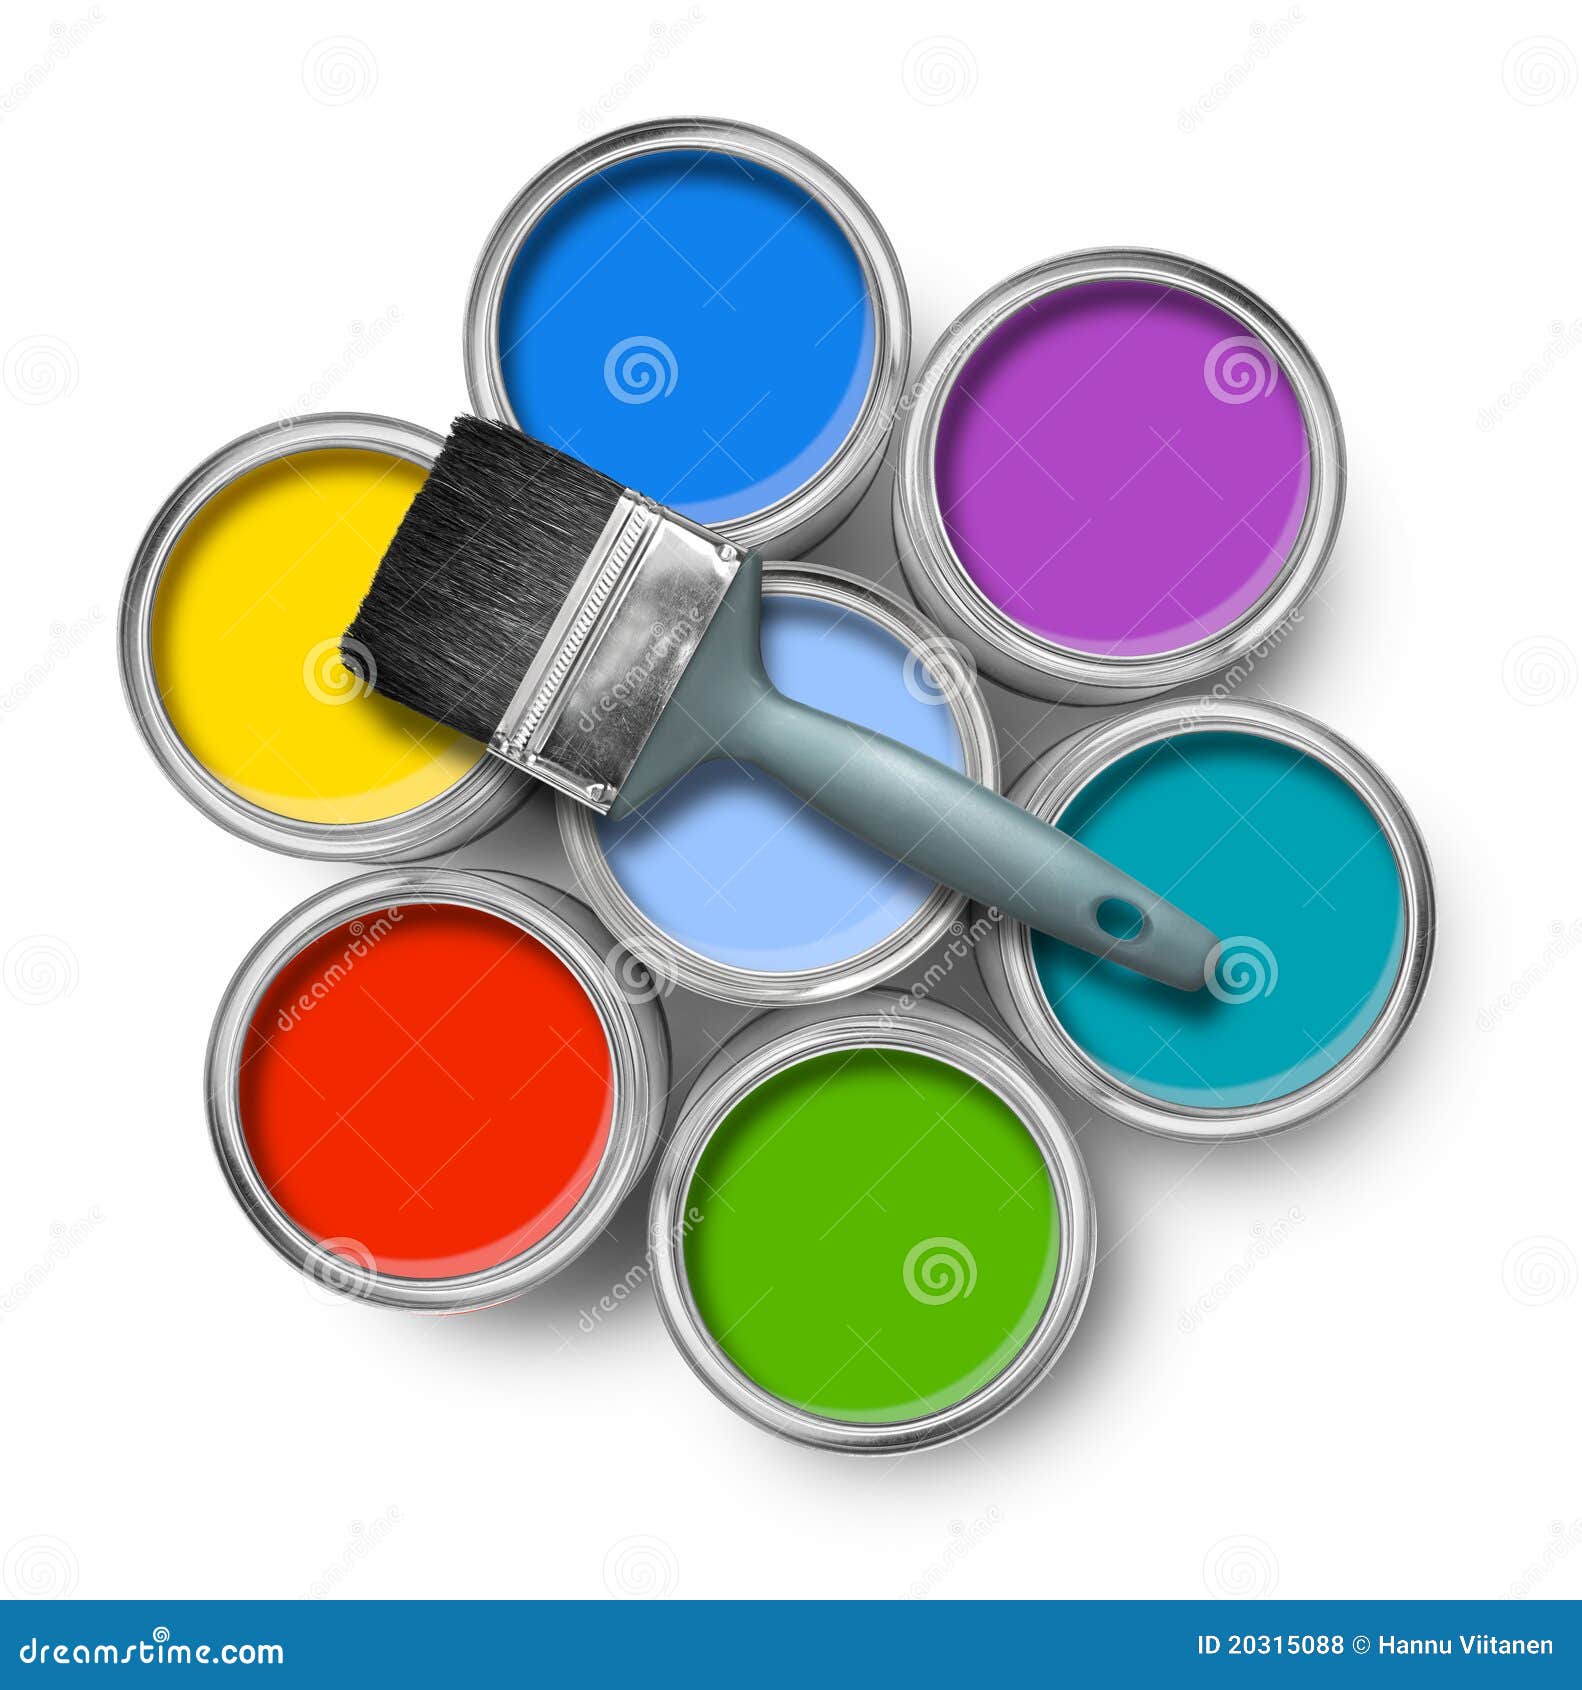 clipart paint can and brush - photo #36